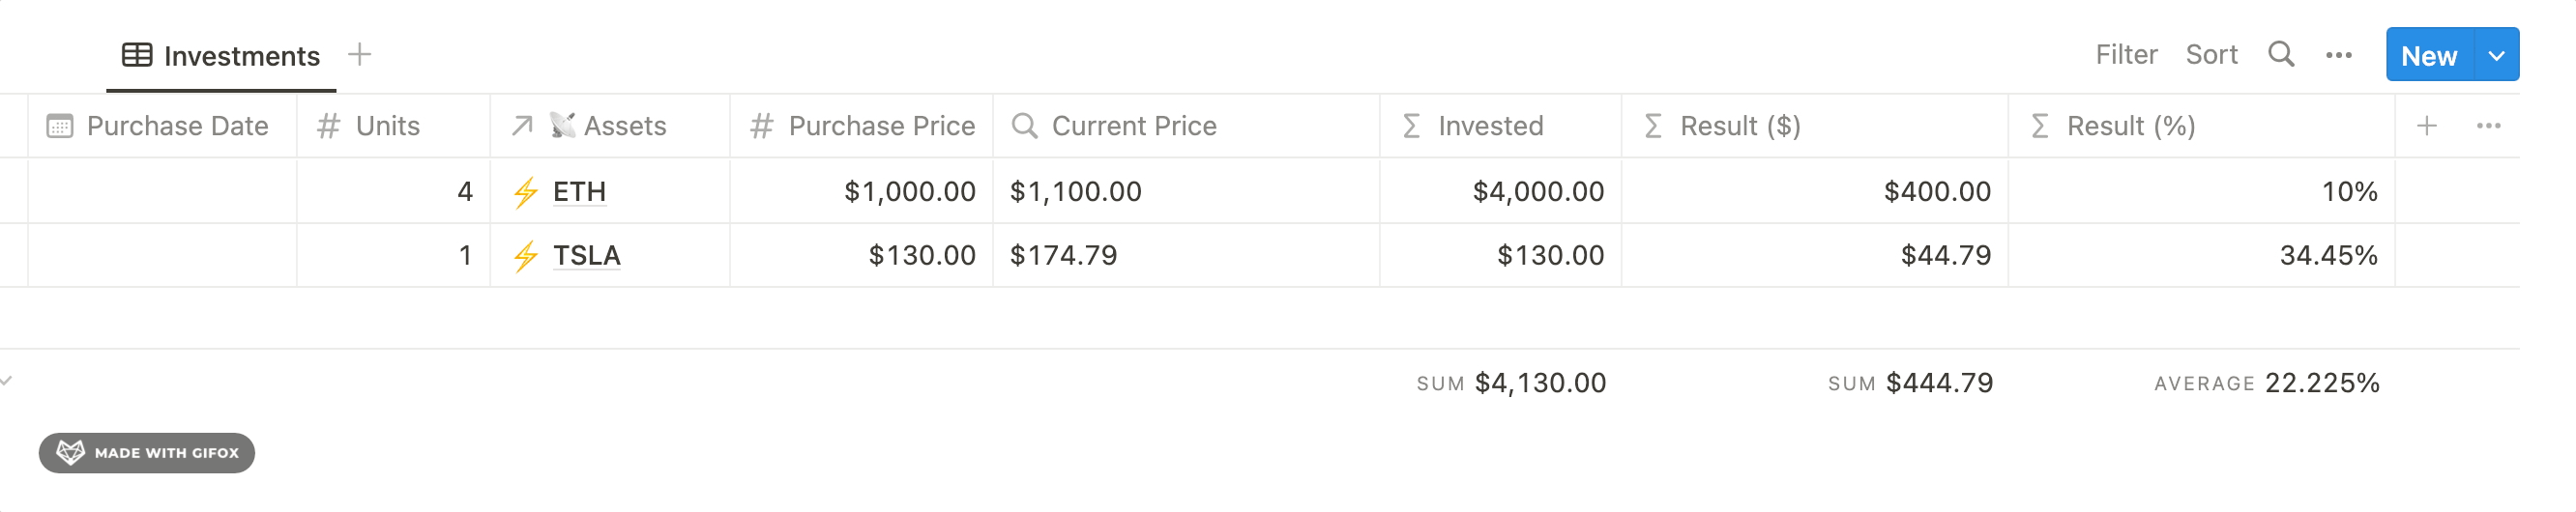 animation showing that when changing the investment values it automatically calculates results